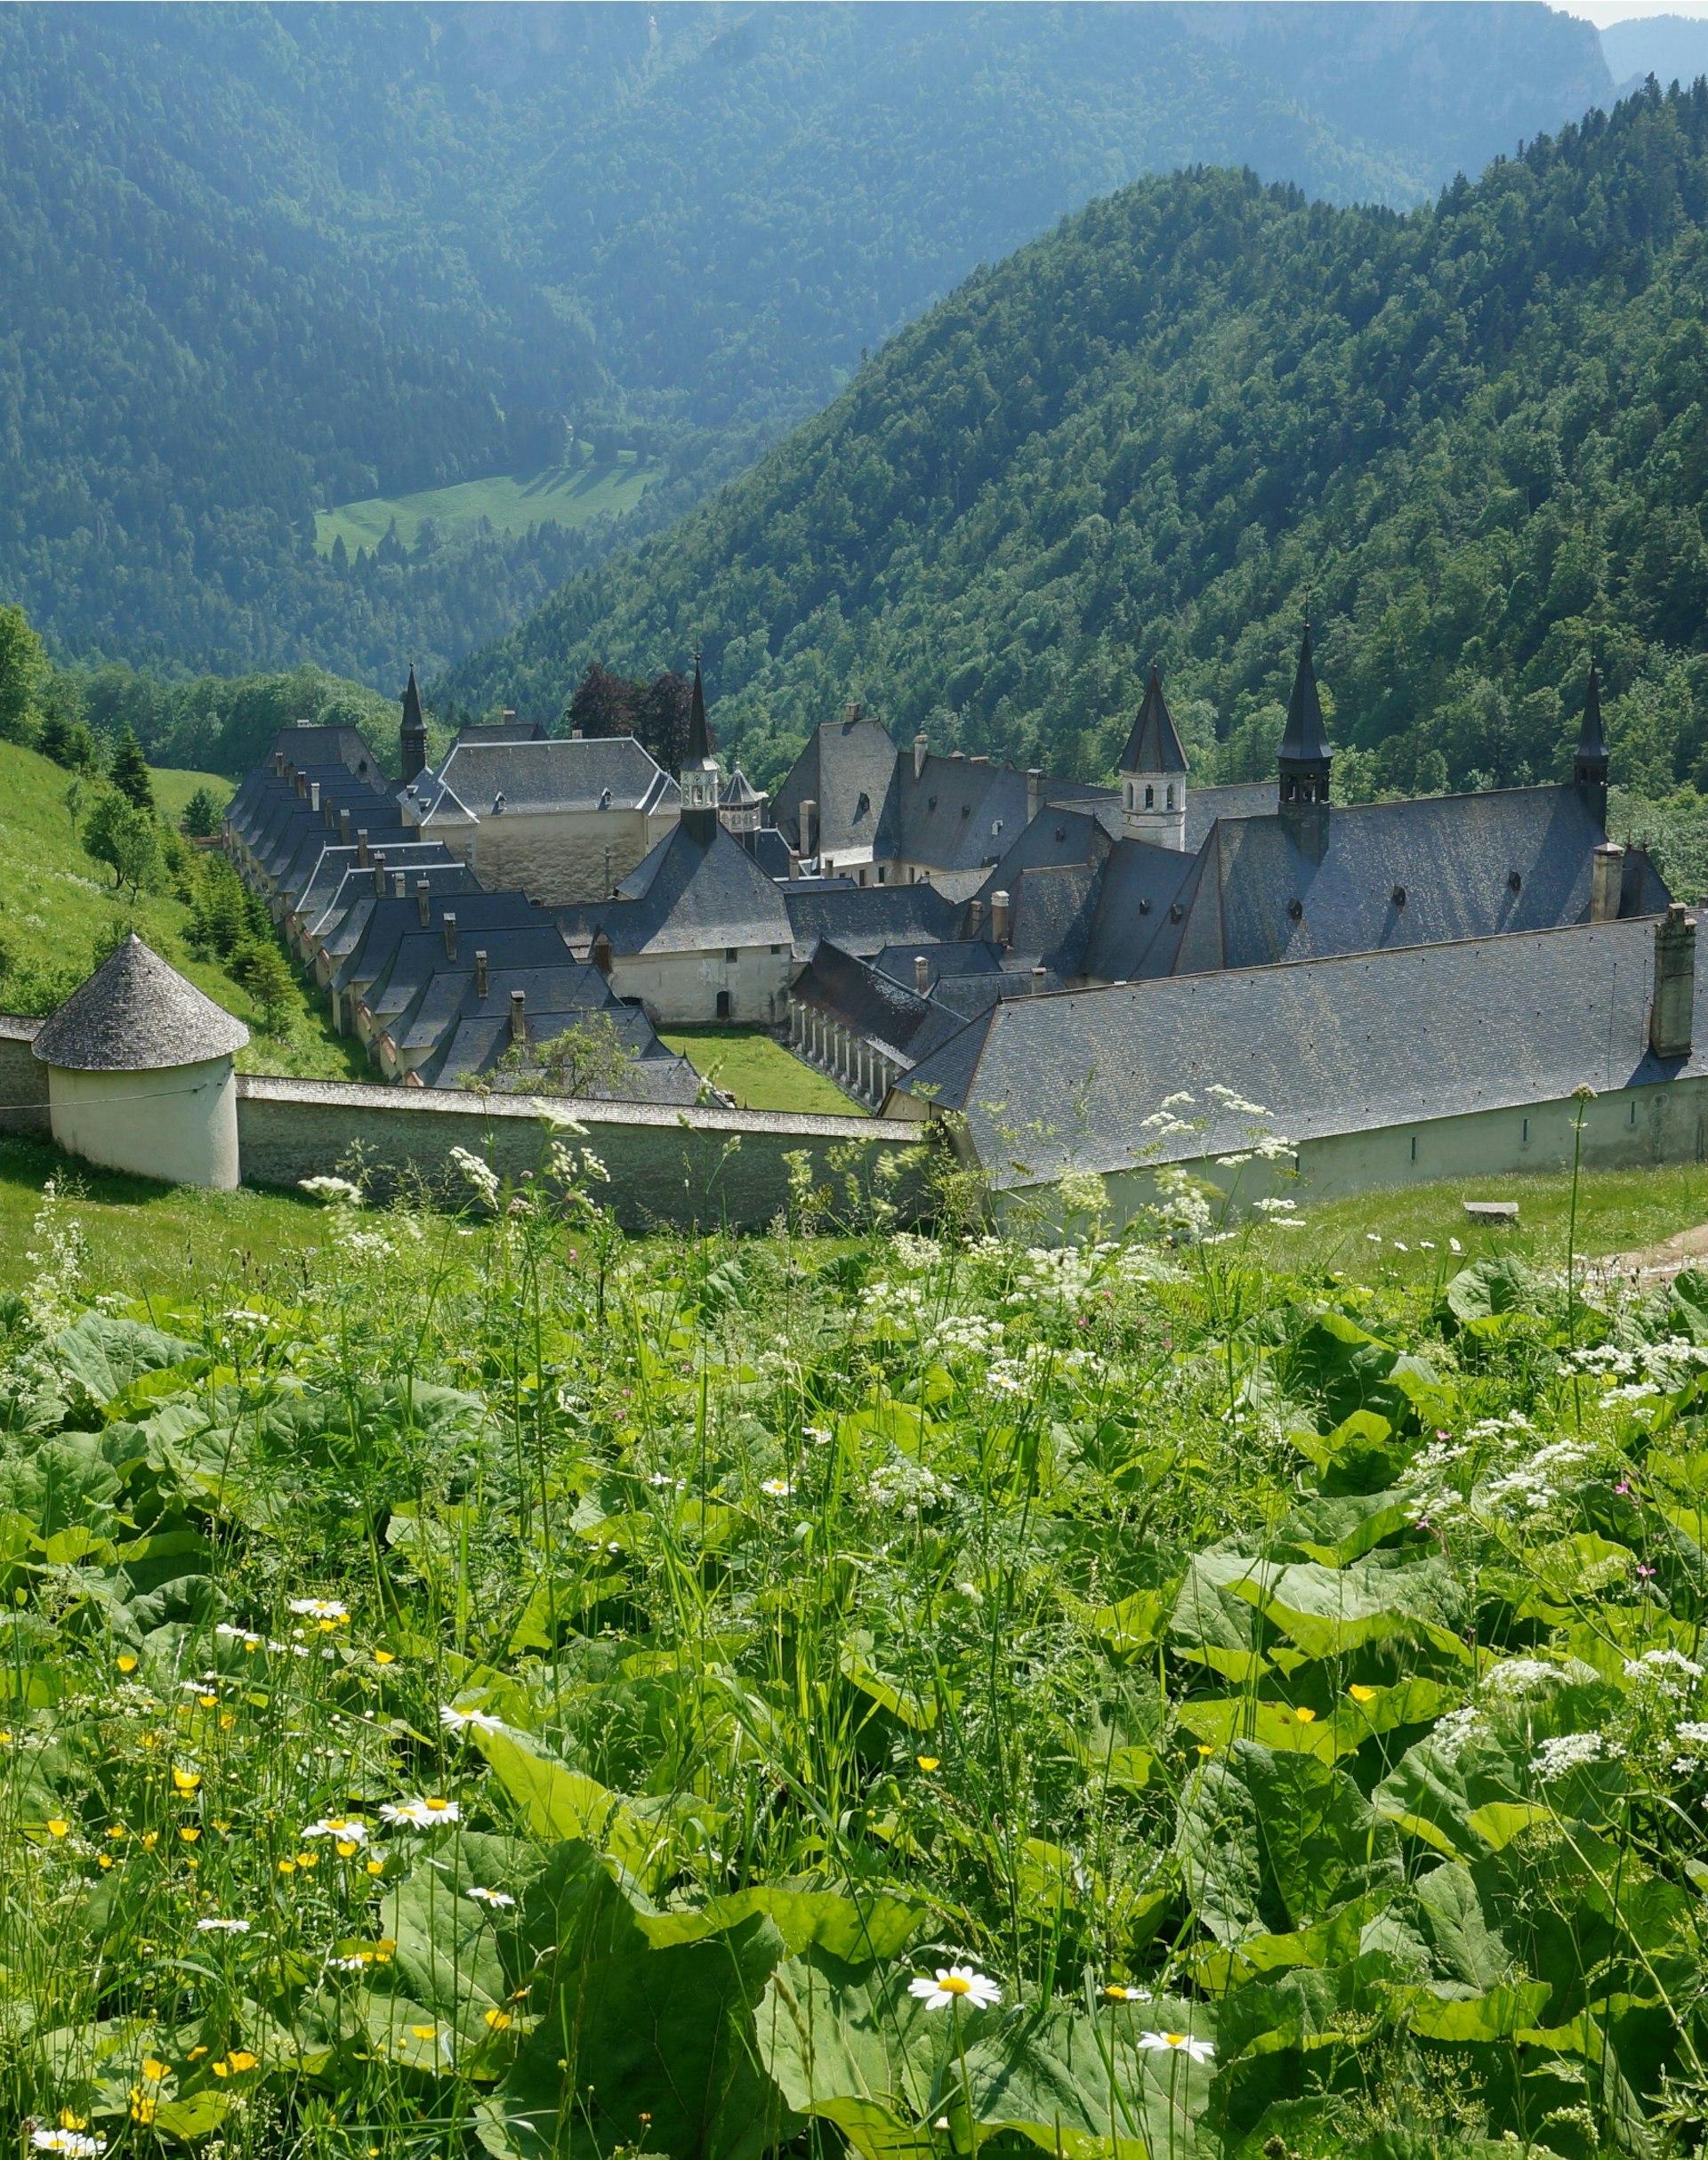 The Grande Chartreuse monastery resides high up the mountains © Monica Suma / Lonely Planet